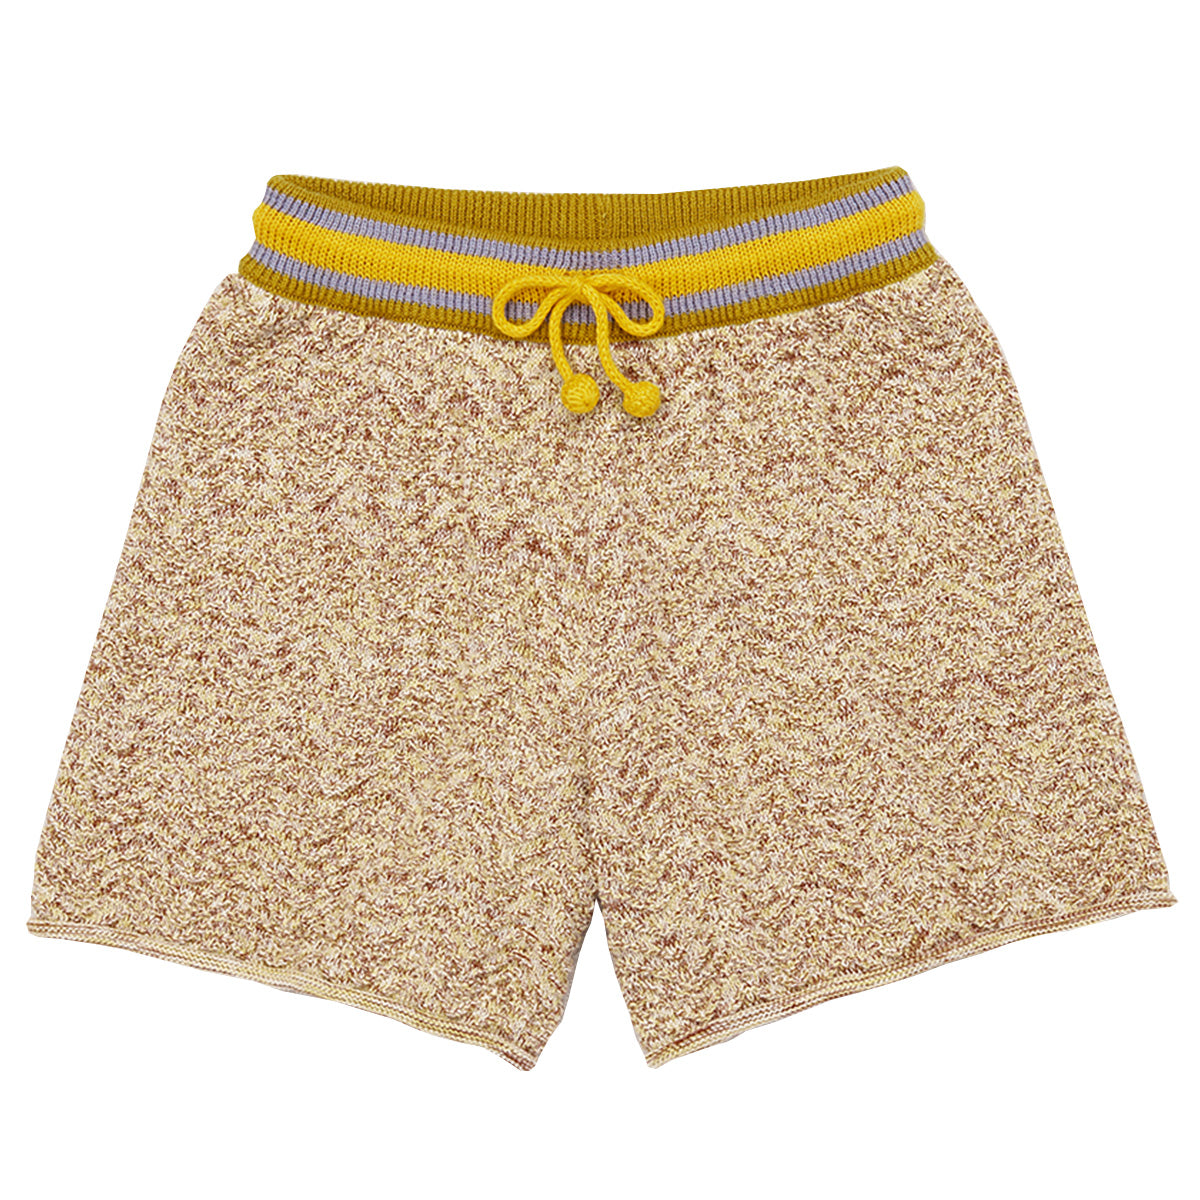 The Chevron Boxer Short from Misha & Puff. A wide-leg short in a marled fine-gauge Pima cotton knit.